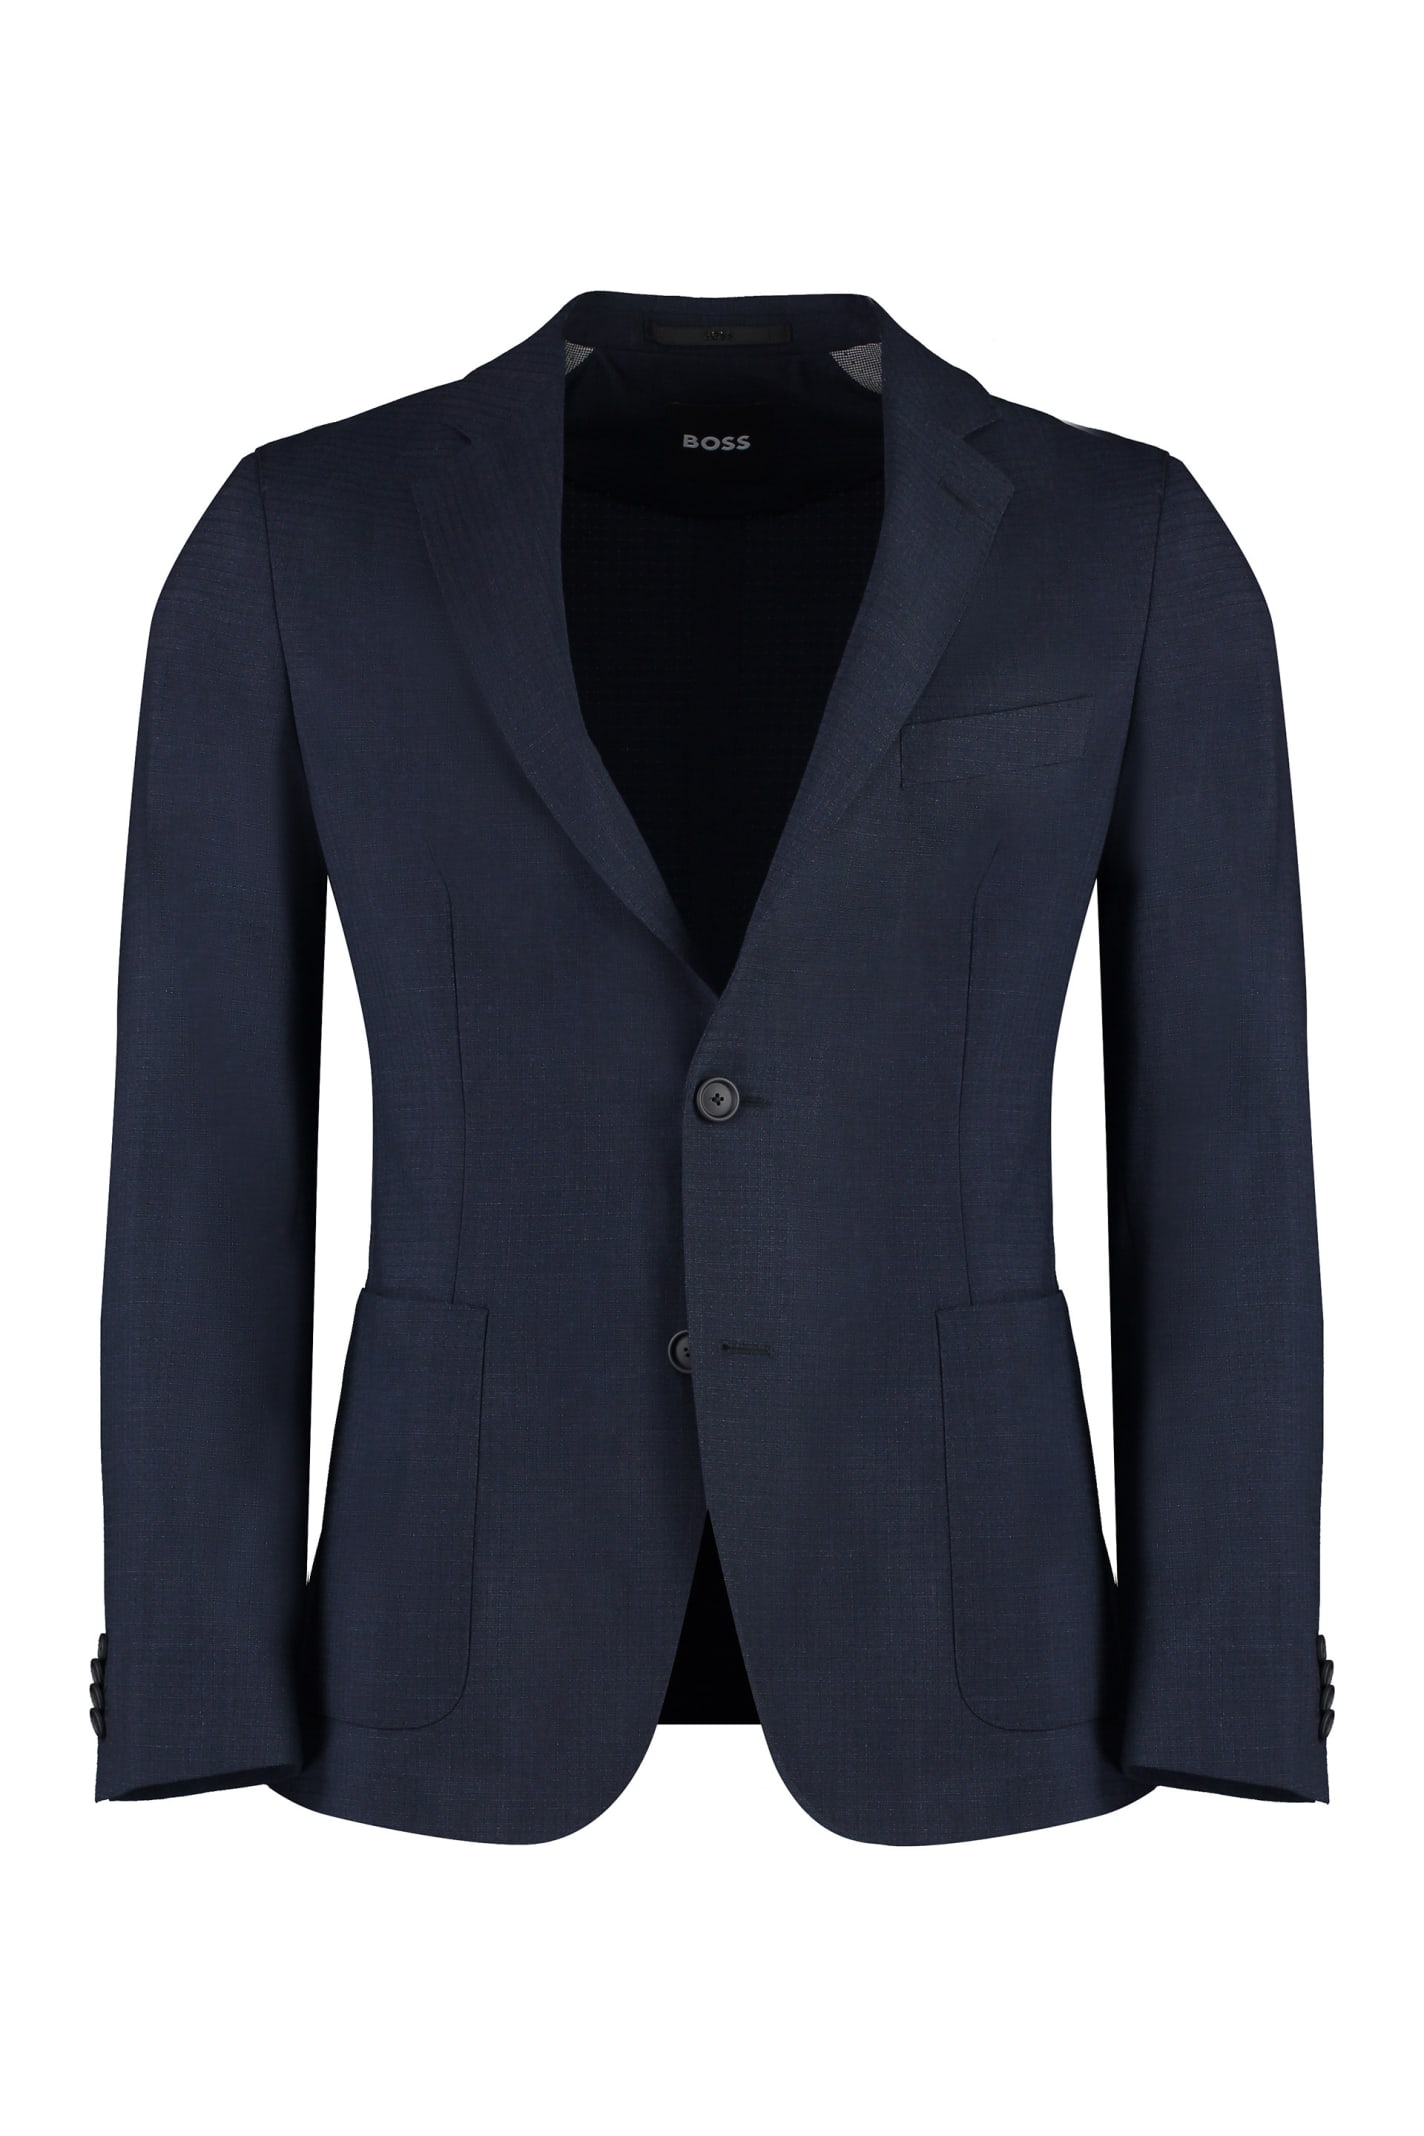 HUGO BOSS MIXED WOOL TWO-PIECES SUIT